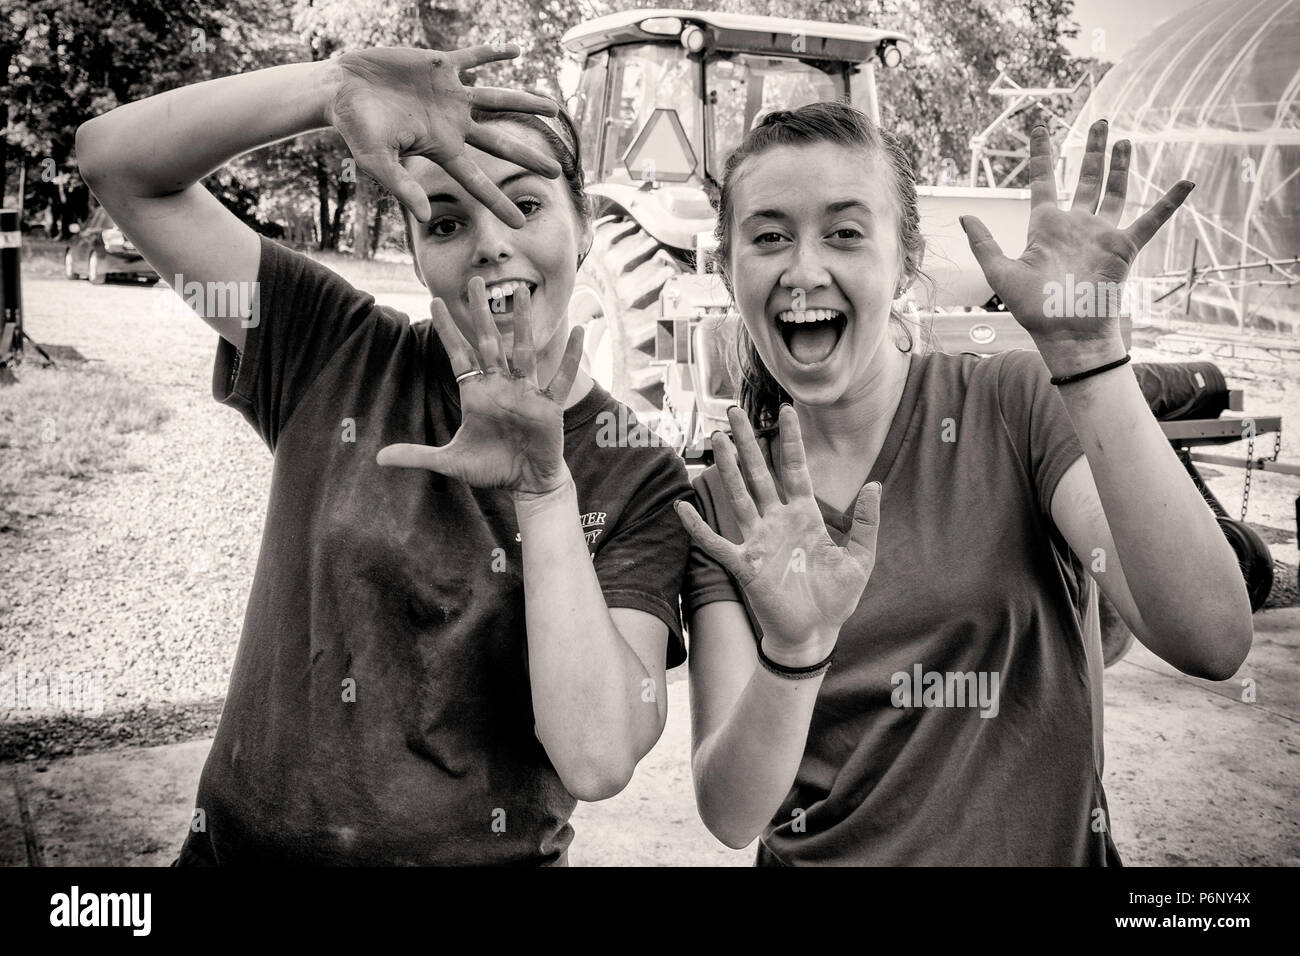 Two women showing their dirty hands from farm work Stock Photo